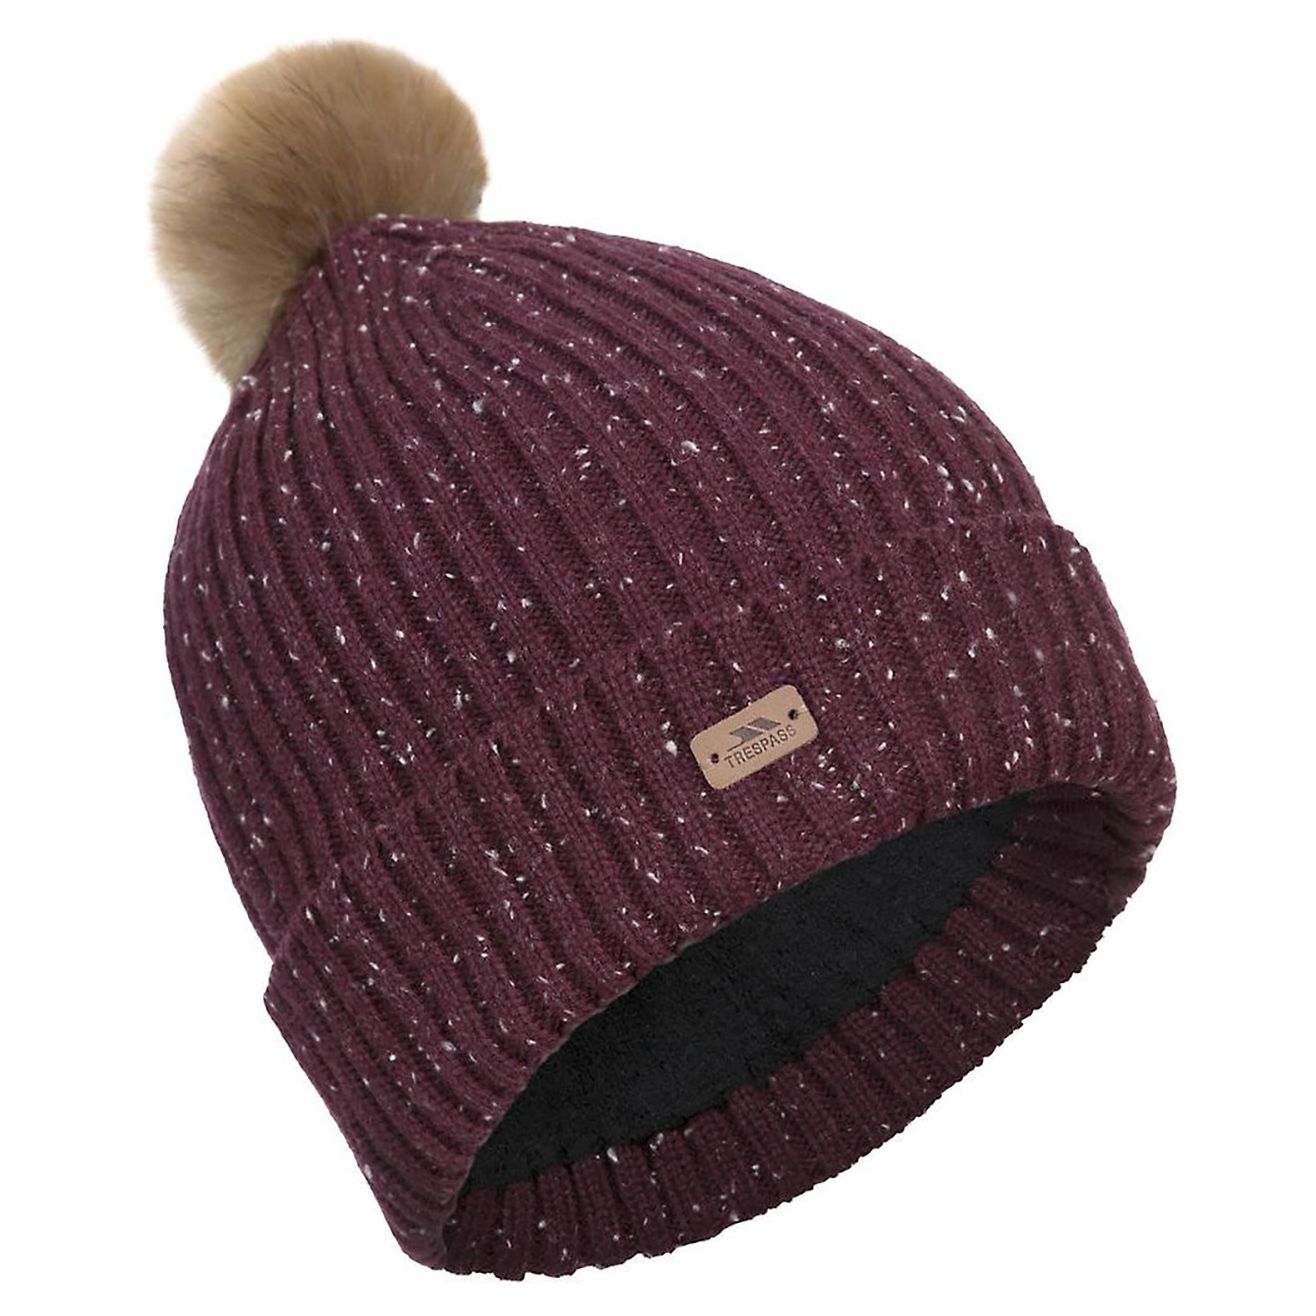 Knitted slouch hat. Faux fur pom pom. Soft chenille lining. Leatherette badge. Outer: 100% Acrylic, Lining: 100% Polyamide, Pom Pom: 100% Acrylic artificial fur.